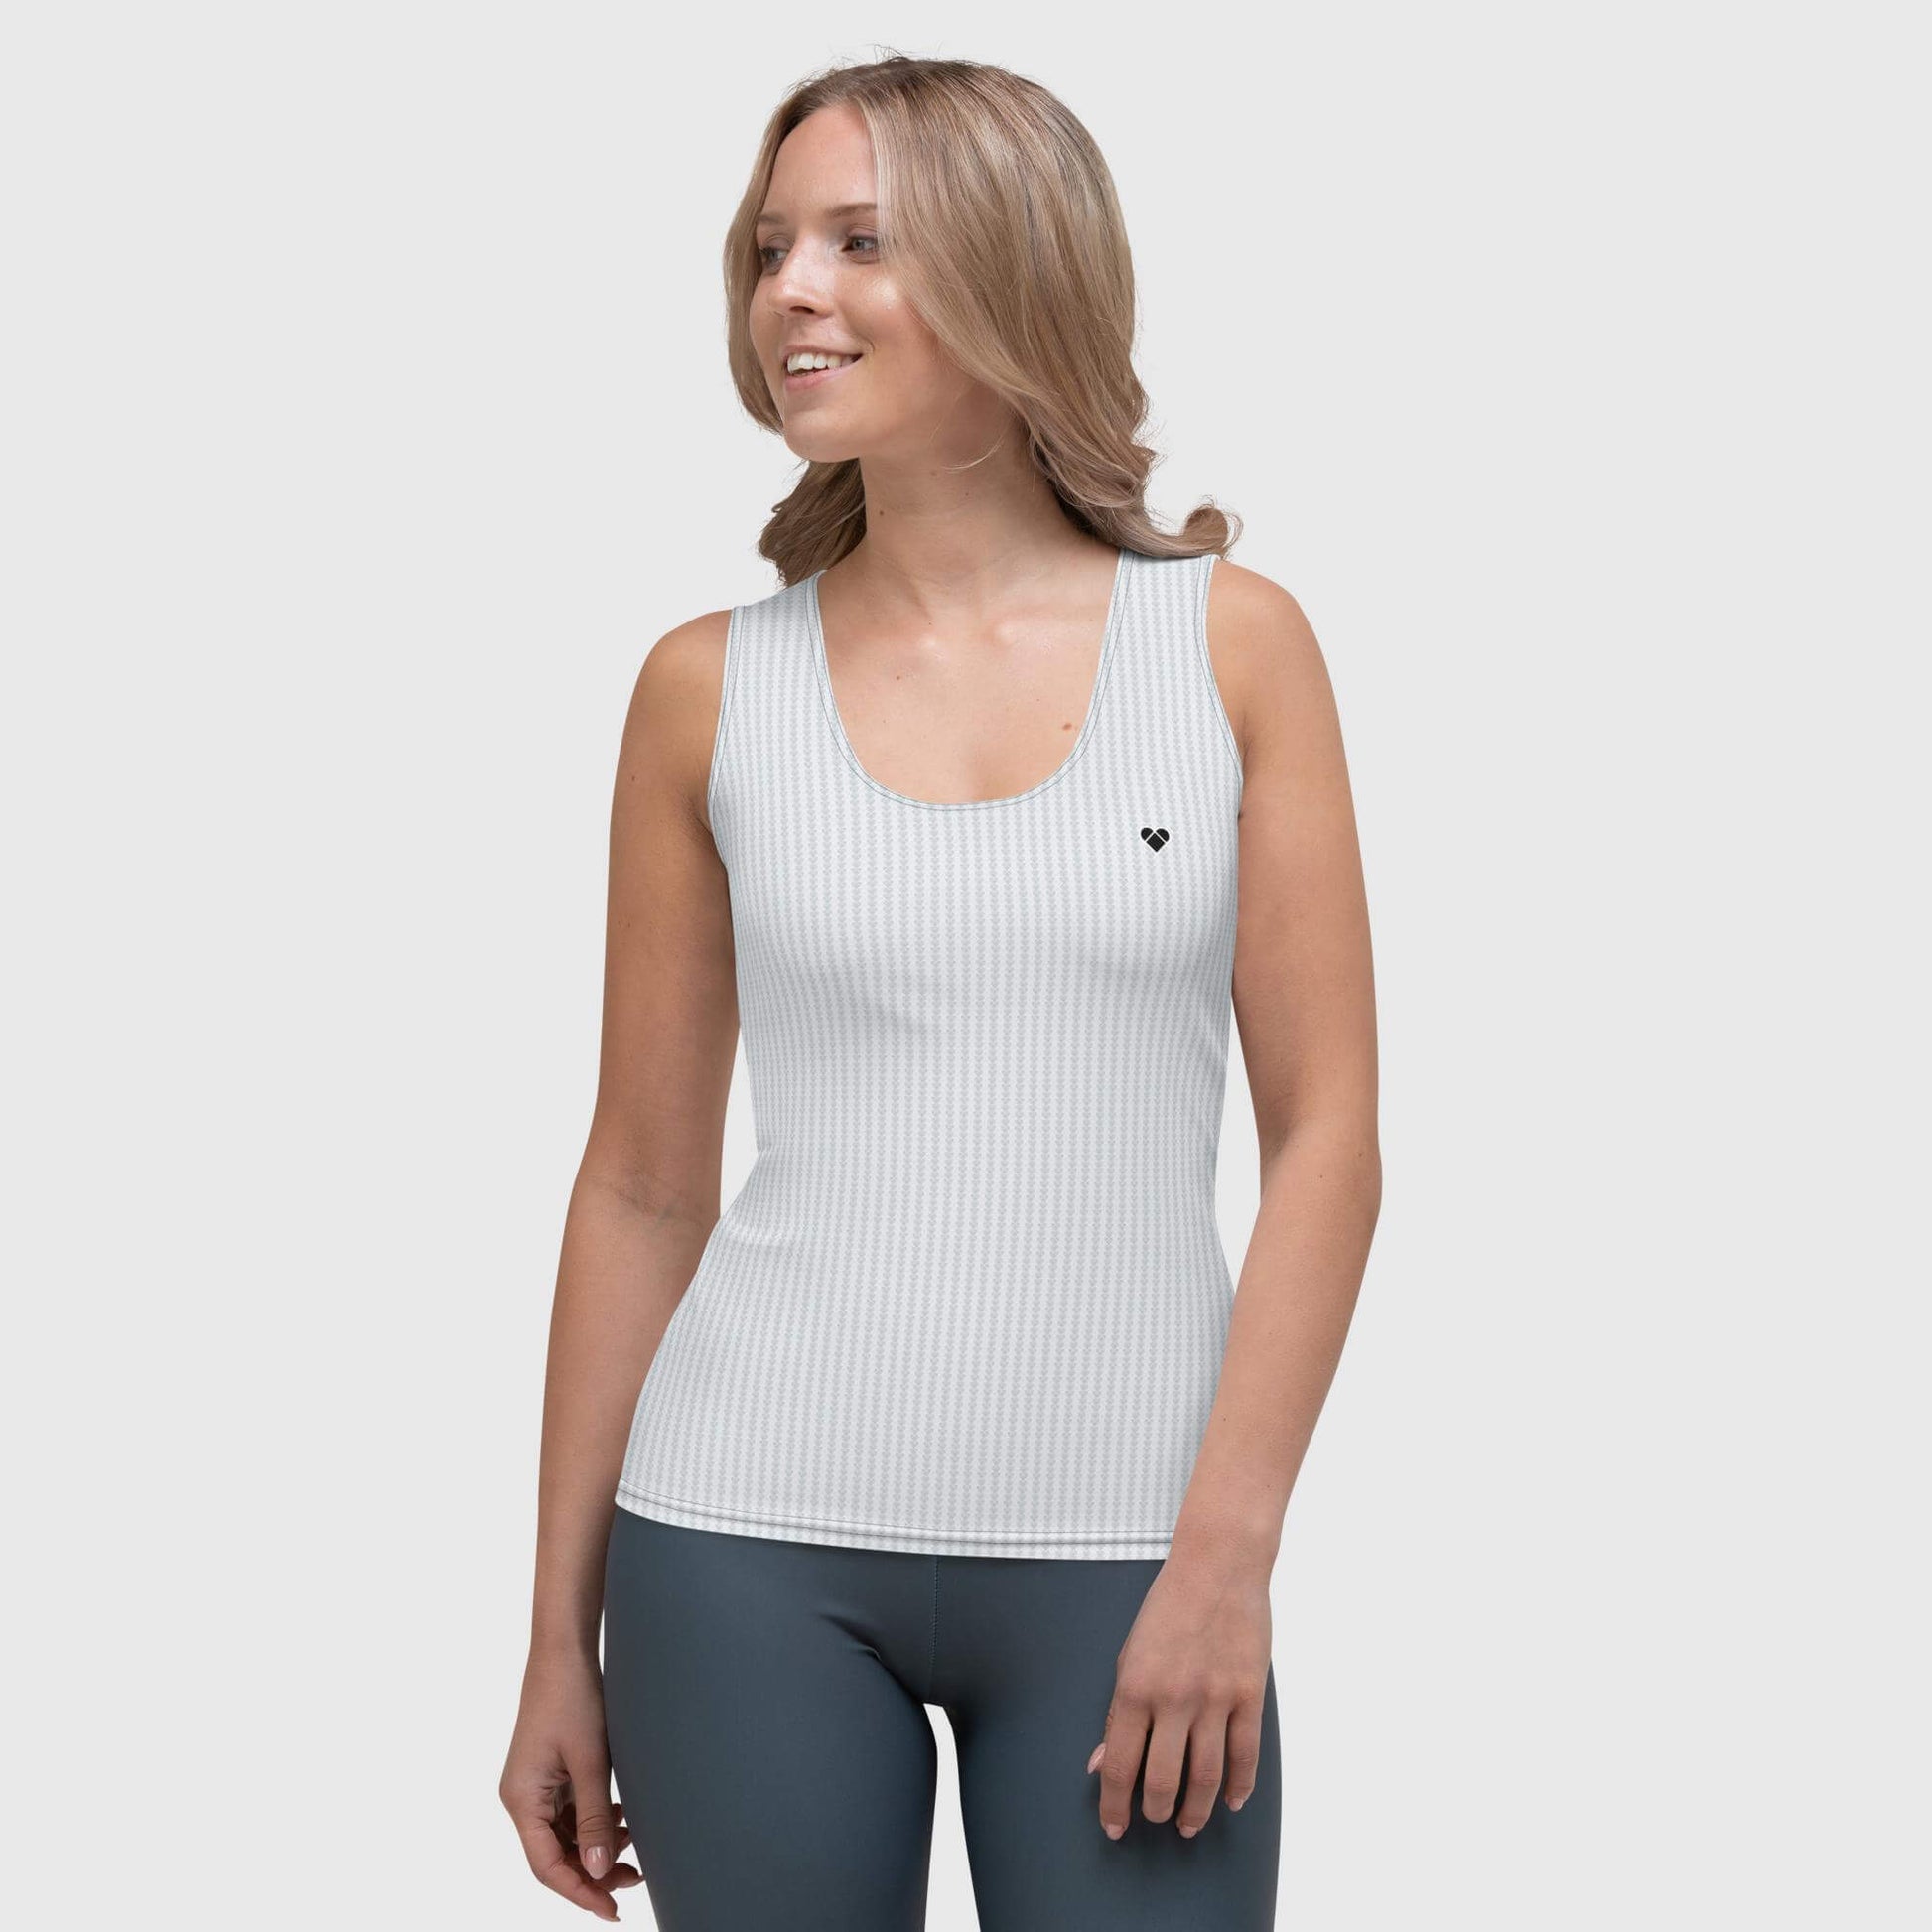 woman model wearing Women's casual and sportswear light gray tank top with a black heart logo and heart pattern